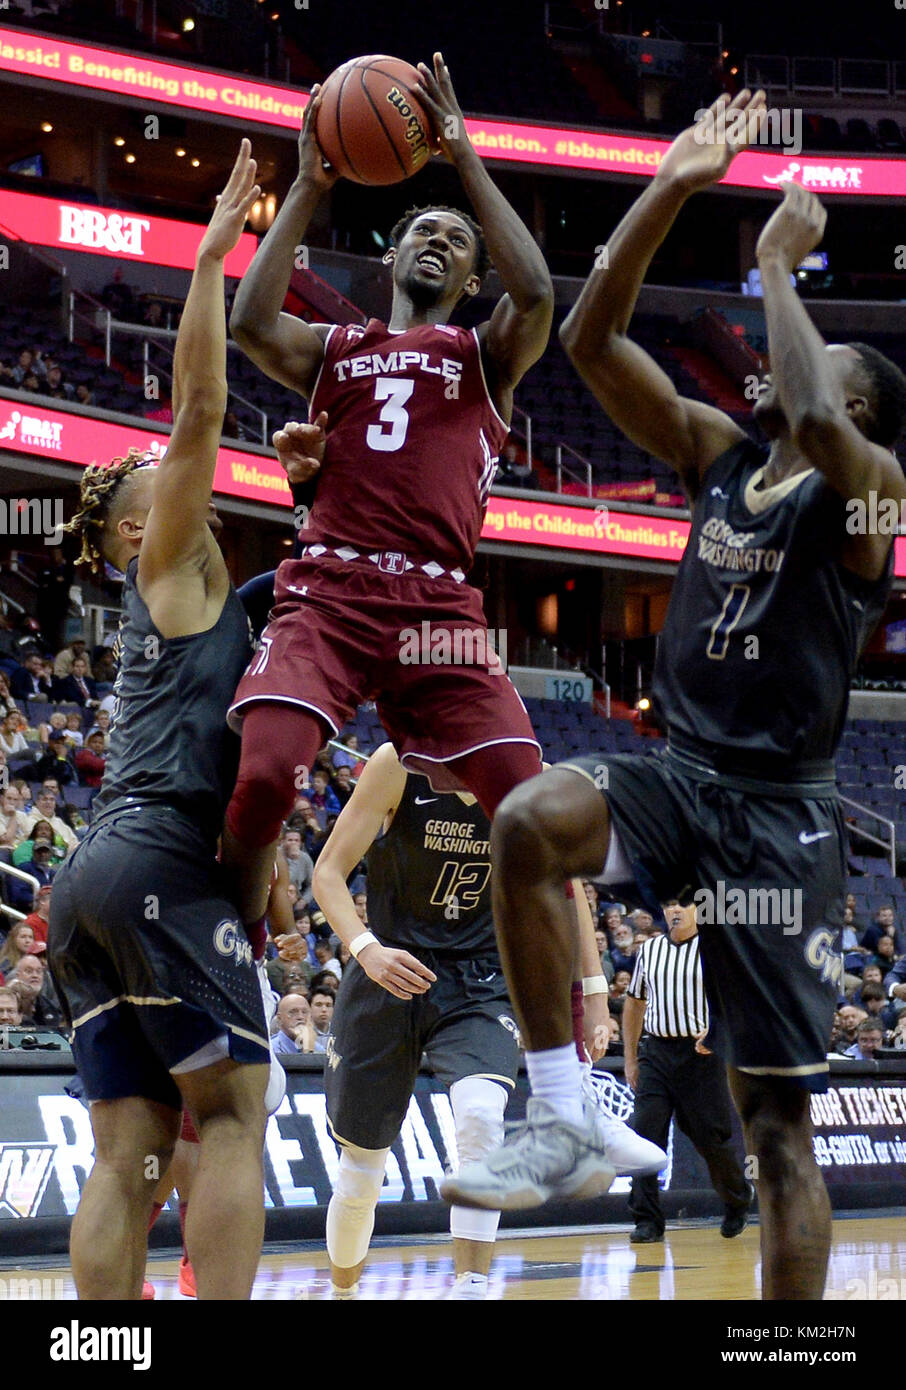 Washington, DC, USA. 3rd Dec, 2017. 20171203 - Temple guard SHIZZ ALSTON, JR. (3) scores between George Washington guard TERRY NOLAN, JR. (1) and George Washington guard JAIR BOLDEN (3) in the second half at Capital One Arena in Washington. Credit: Chuck Myers/ZUMA Wire/Alamy Live News Stock Photo